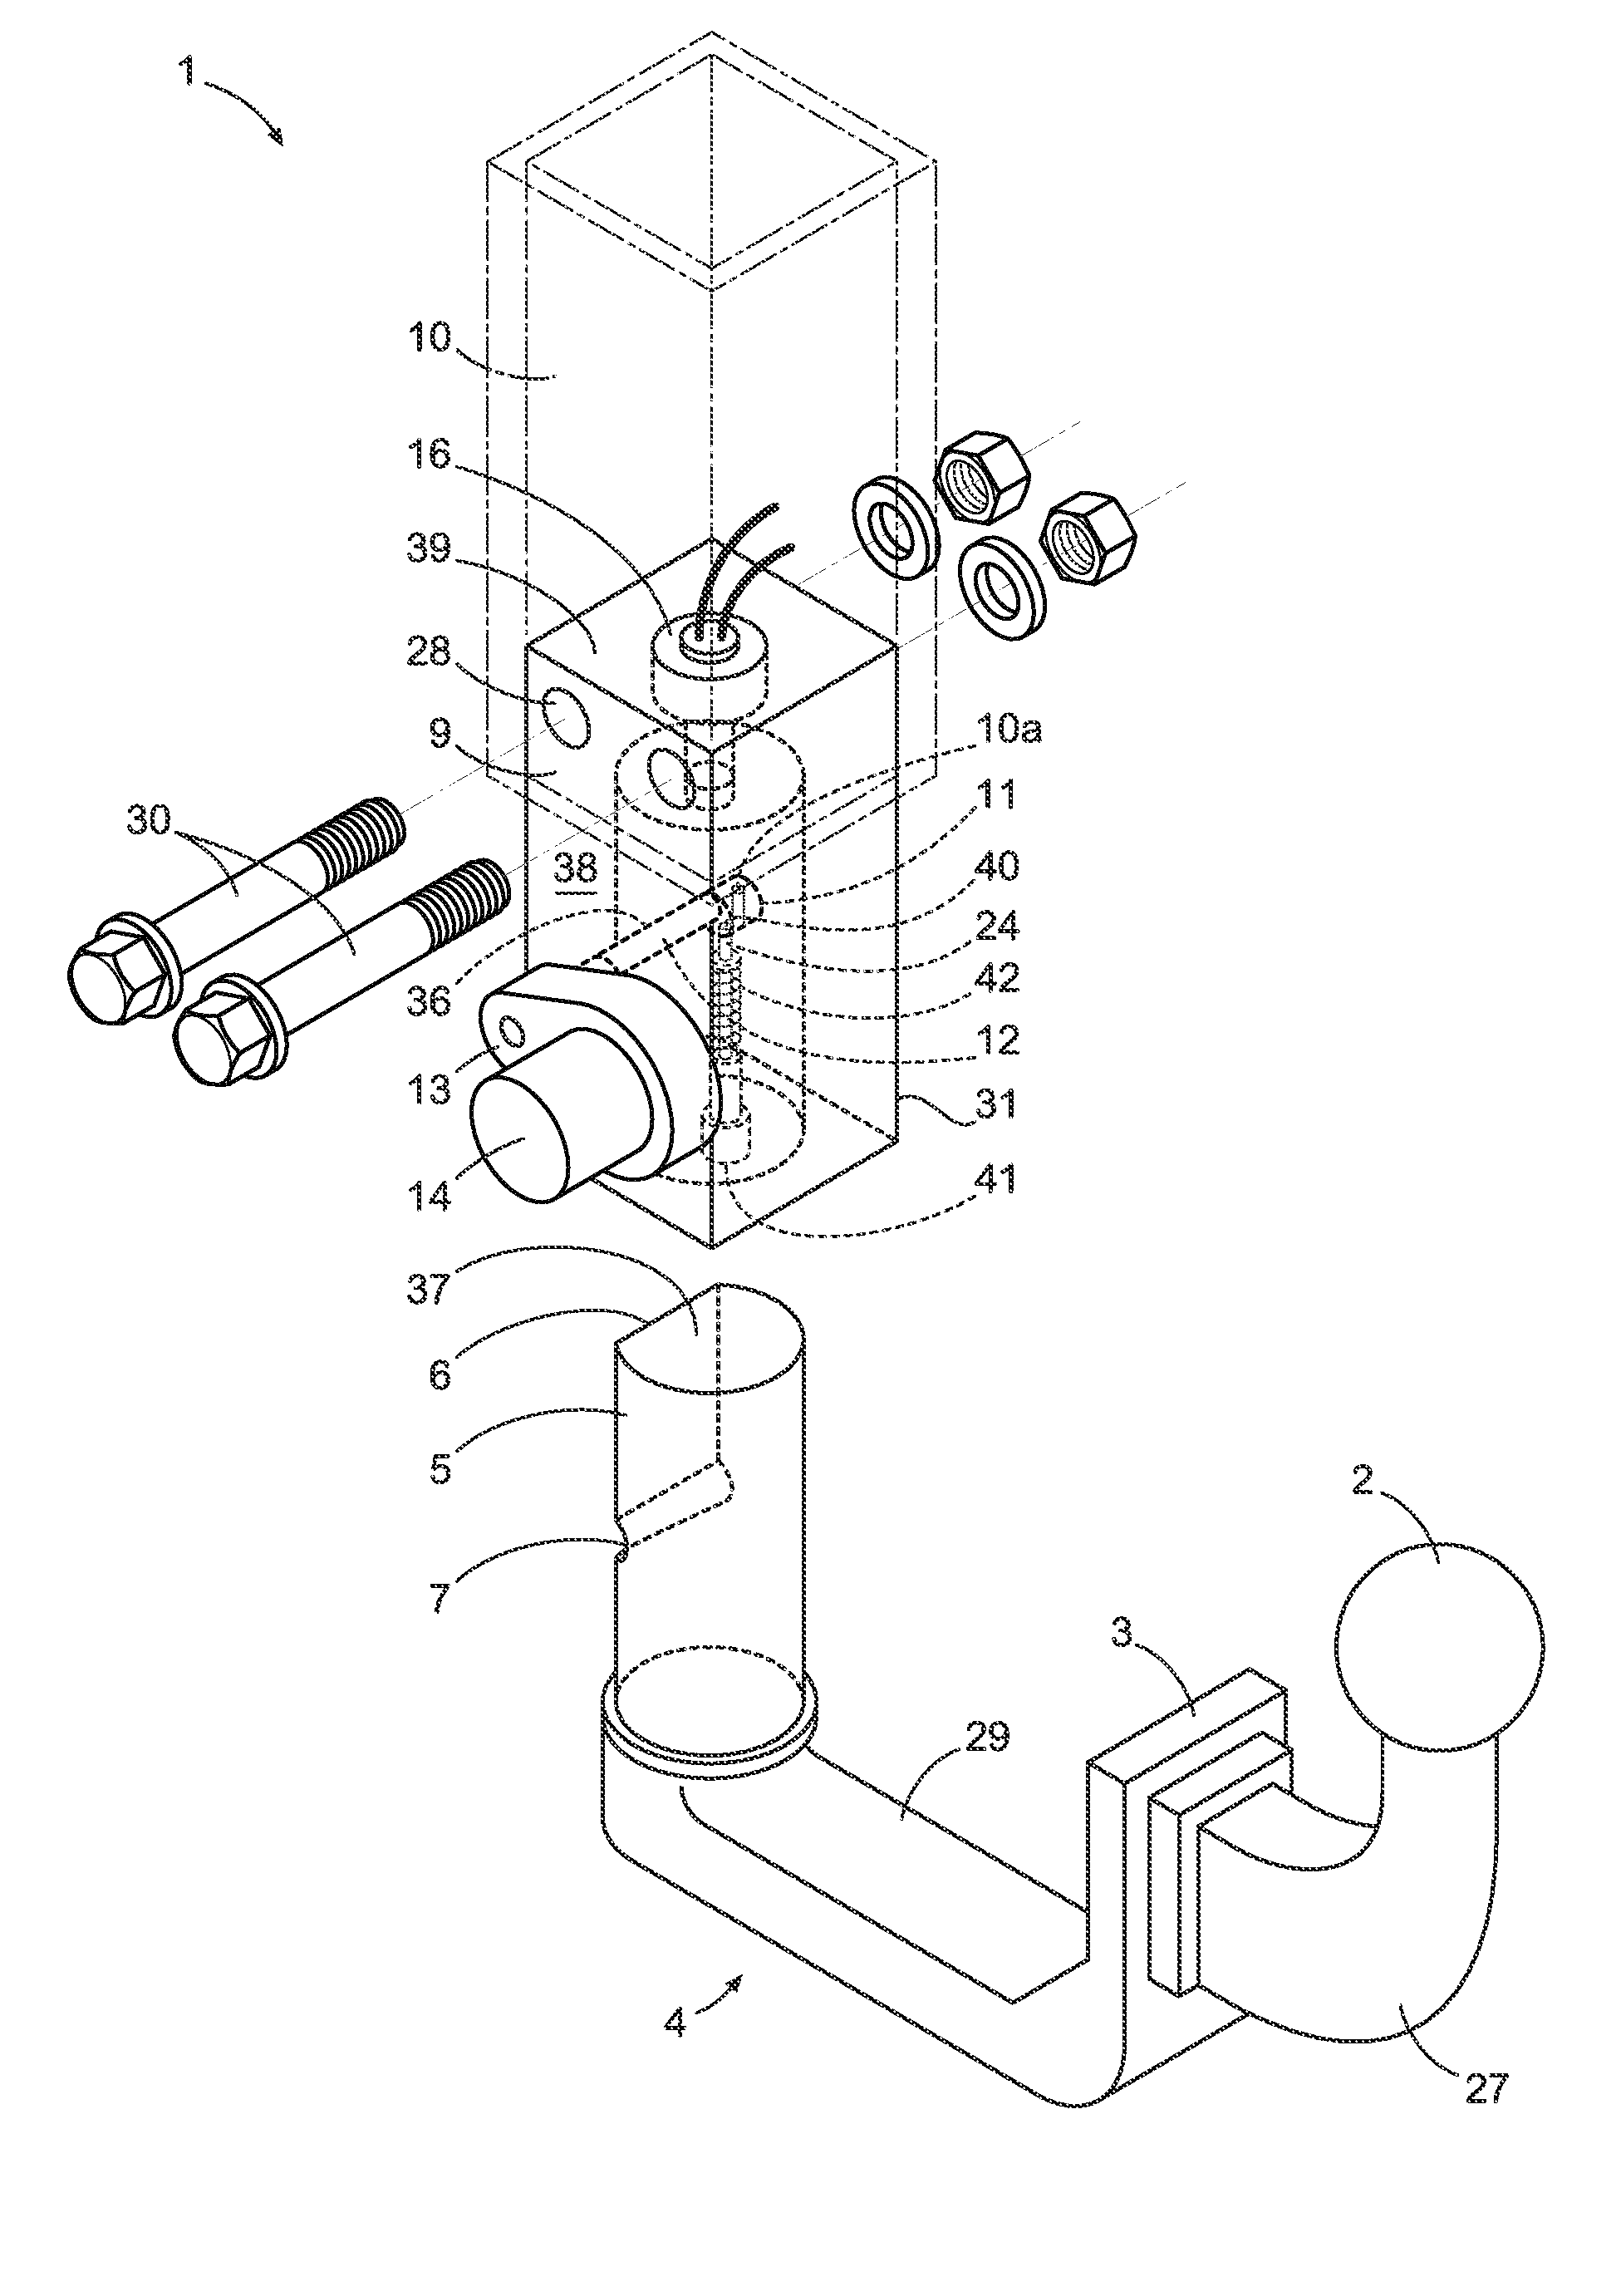 Electronically controlled tow hitch assembly